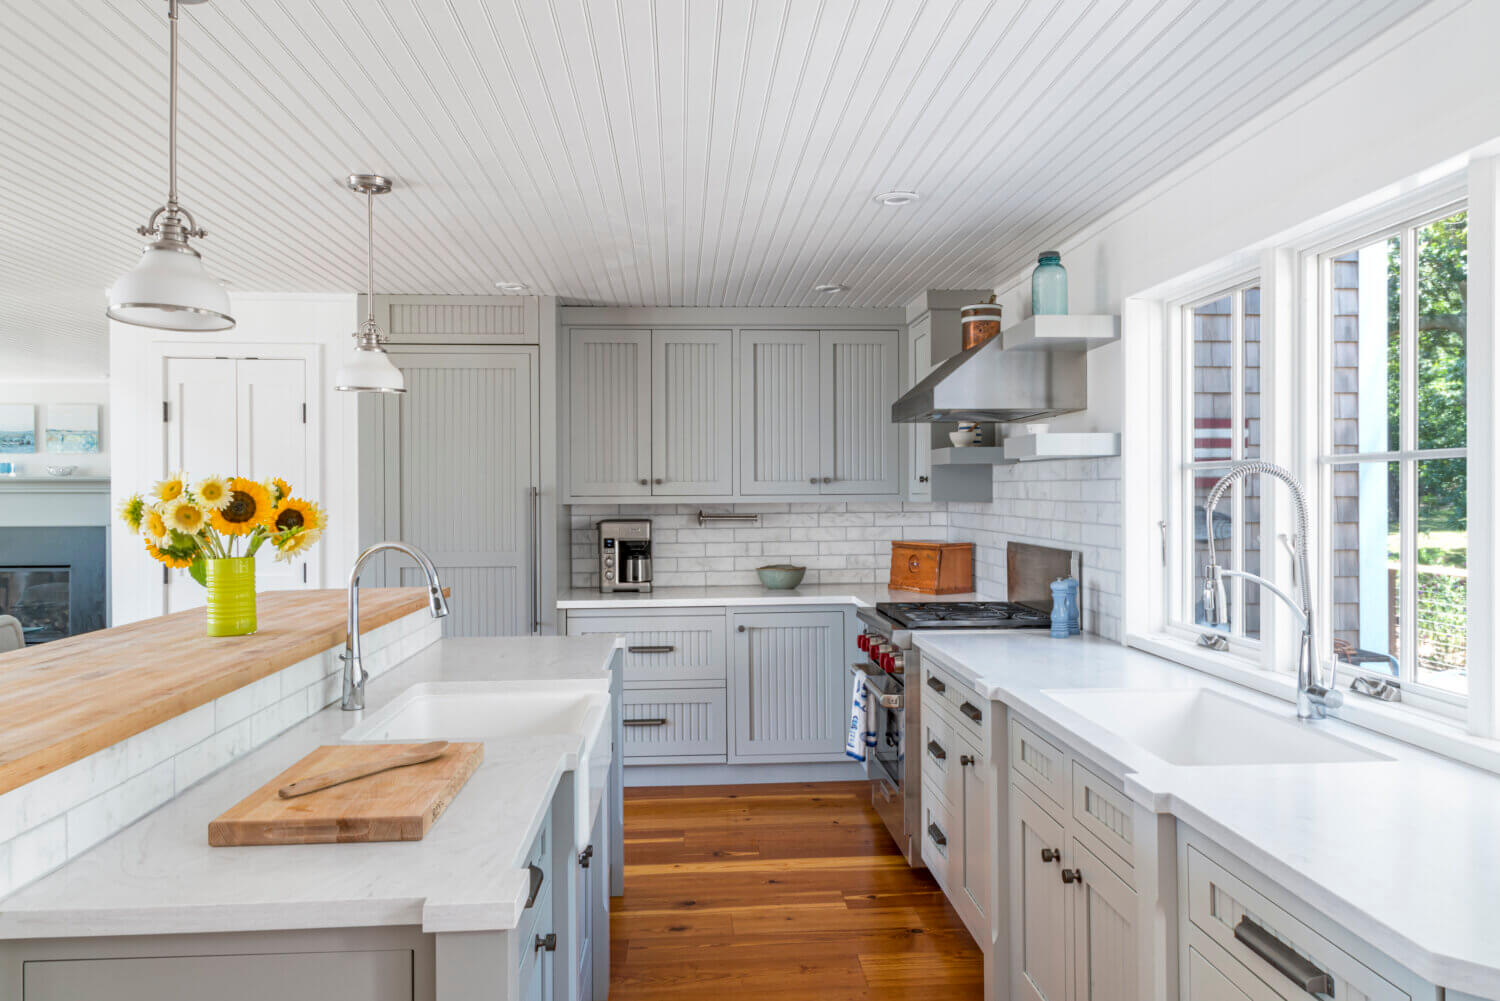 A gray and white cottage style kitchen with inset cabinets that have a beaded panel within the cabinet doors.